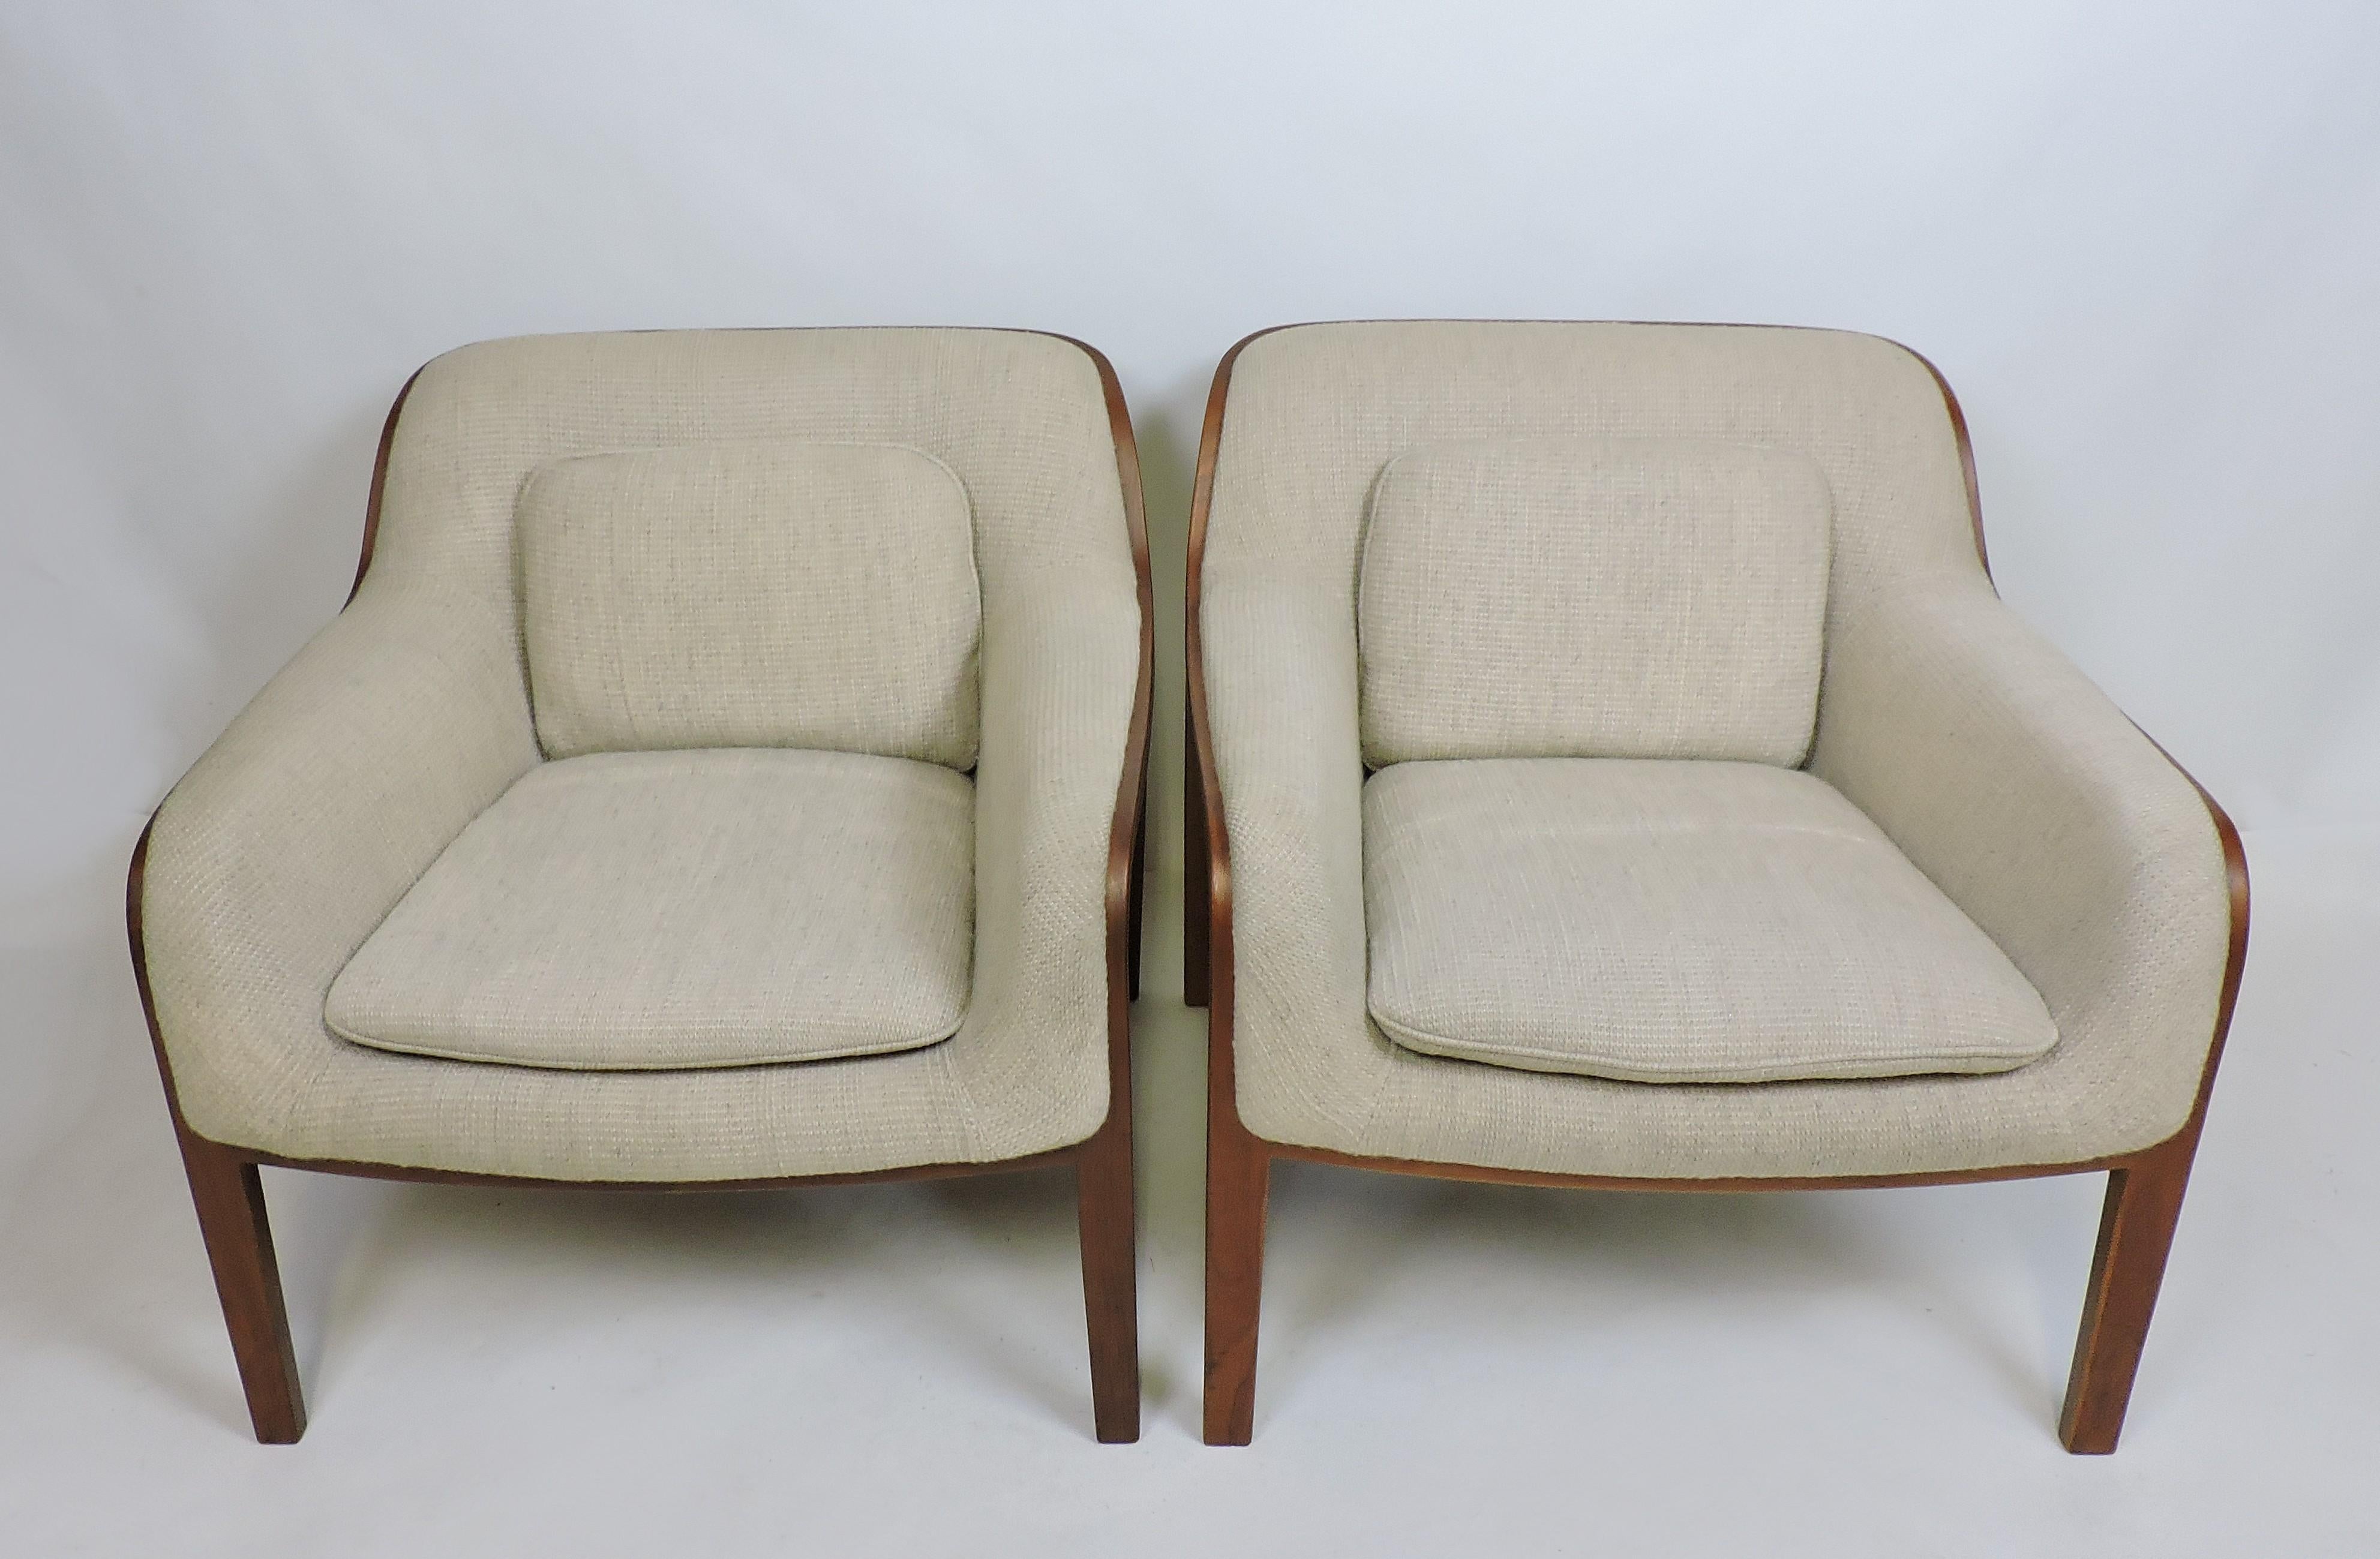 Pair of Bill Stephens Mid-Century Modern Bentwood Lounge Chairs for Knoll 1